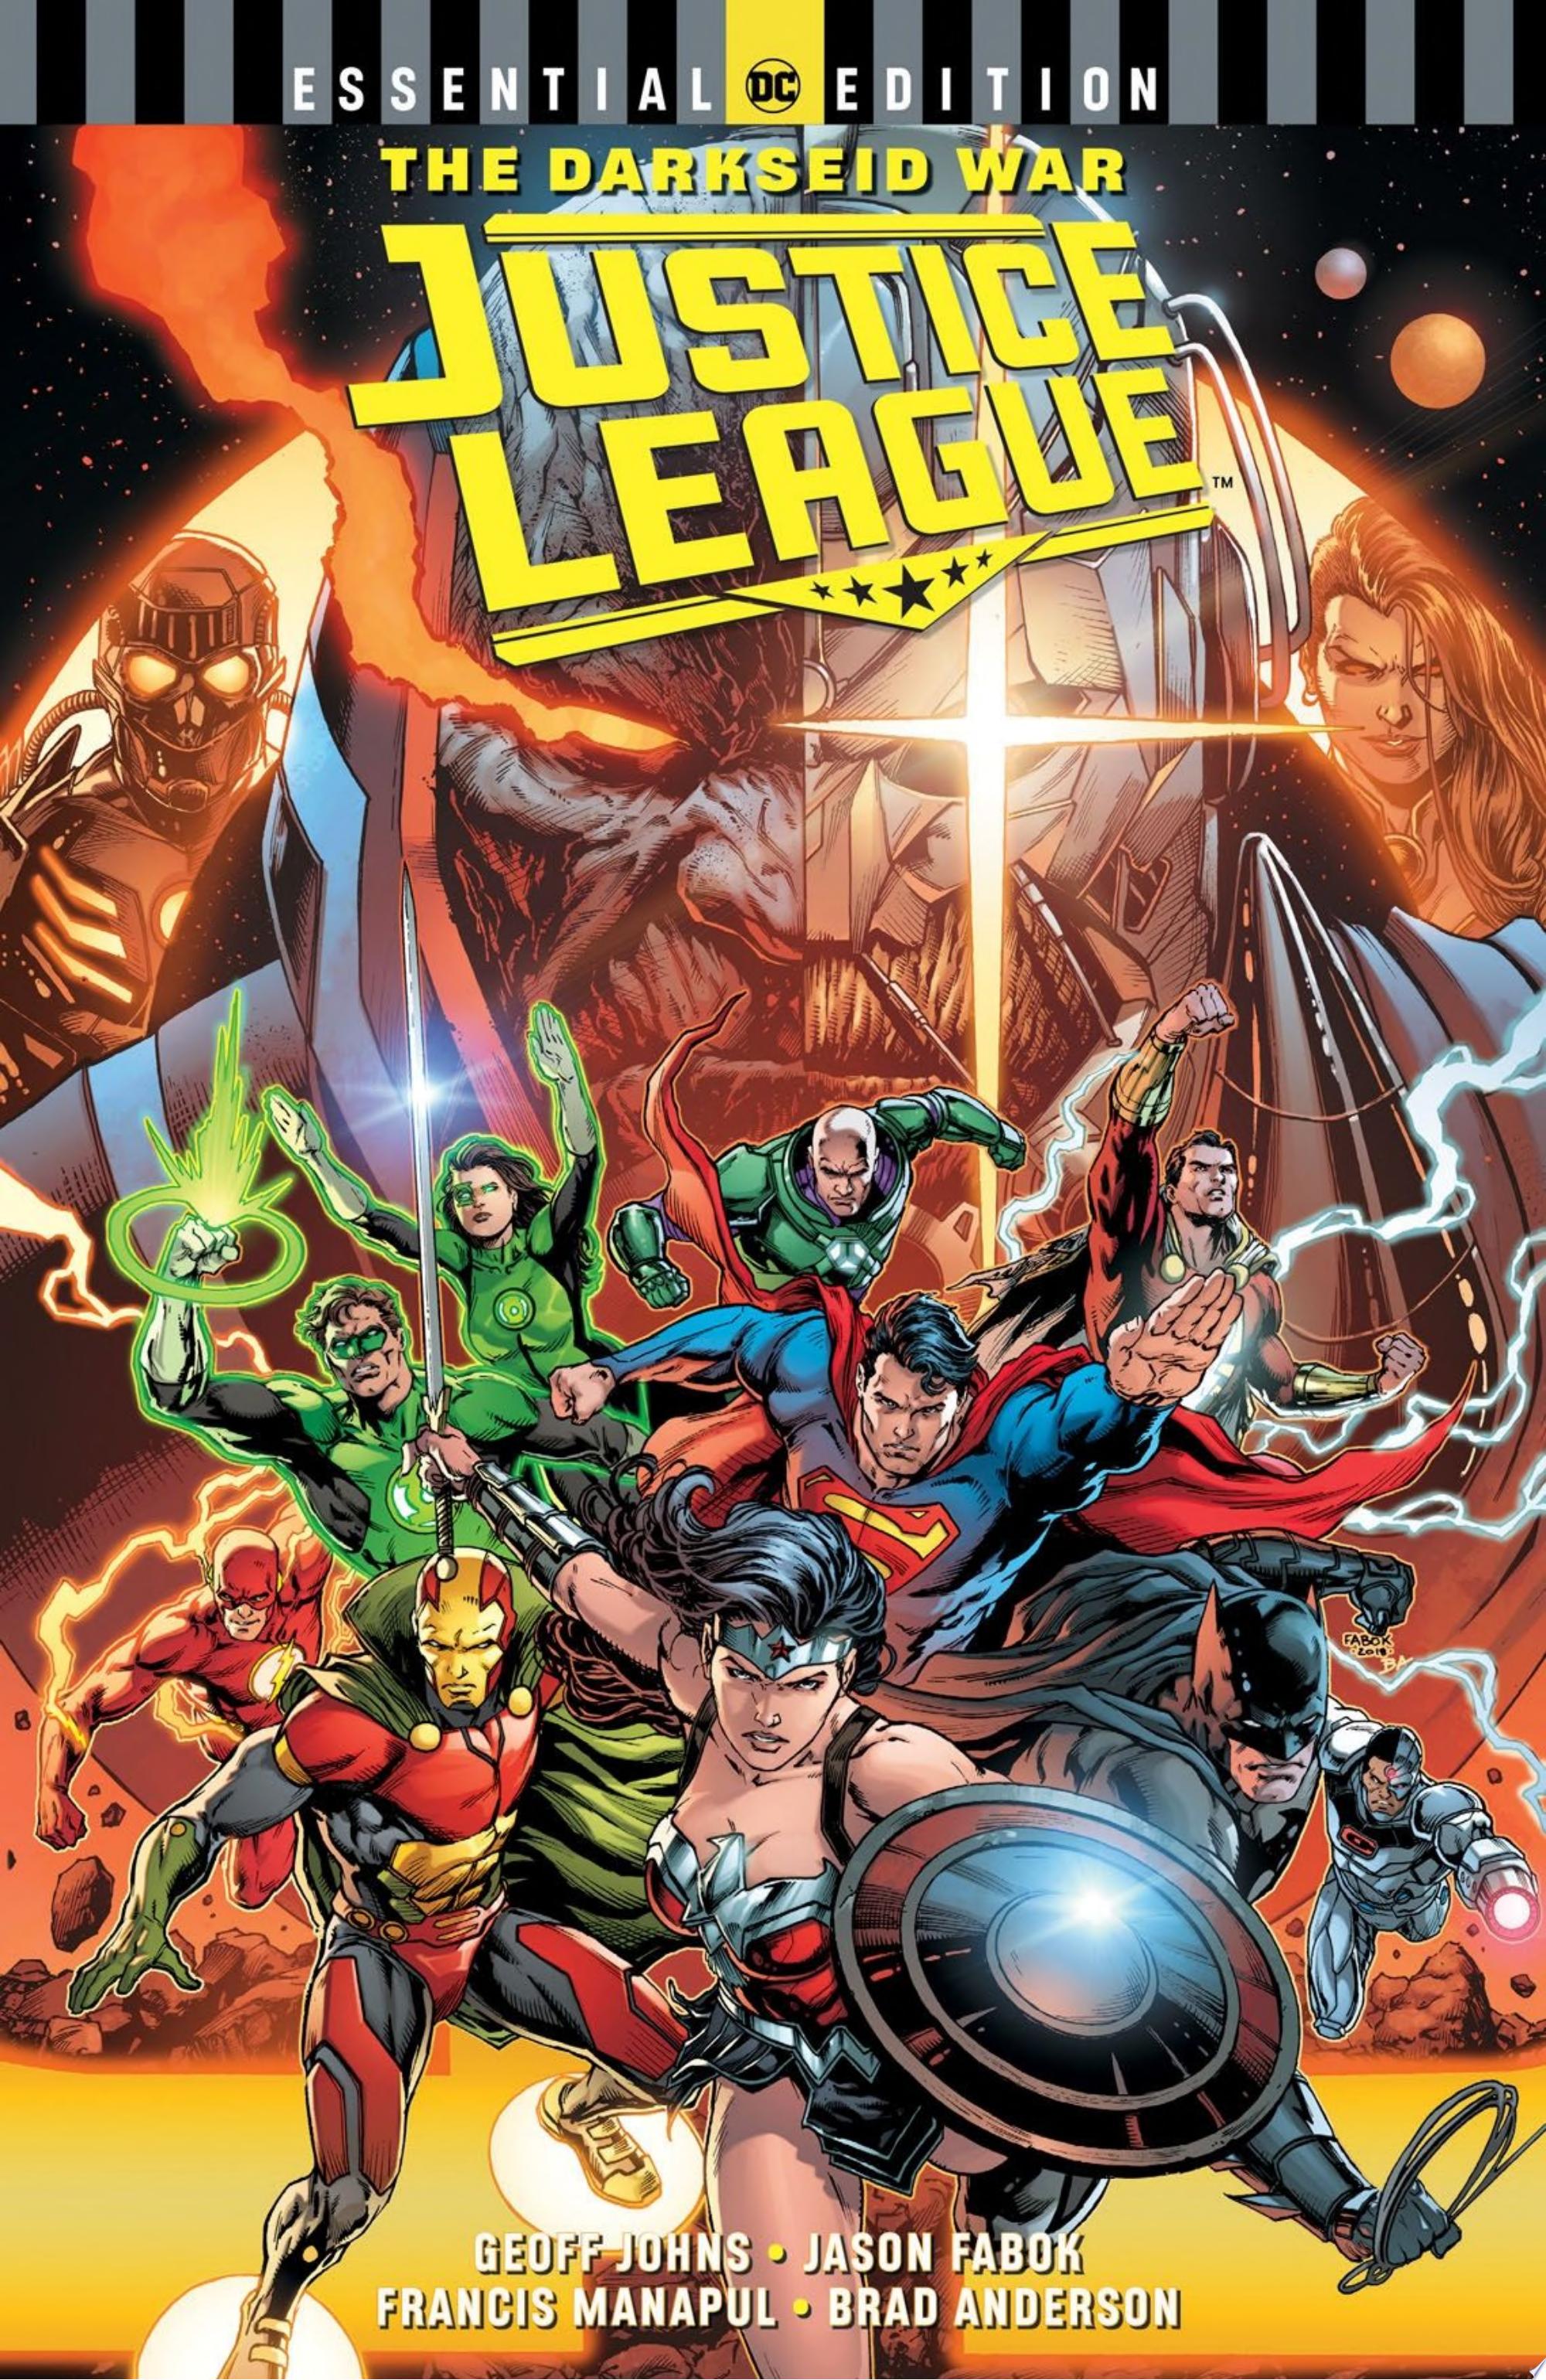 Image for "Justice League: The Darkseid War (DC Essential Edition)"